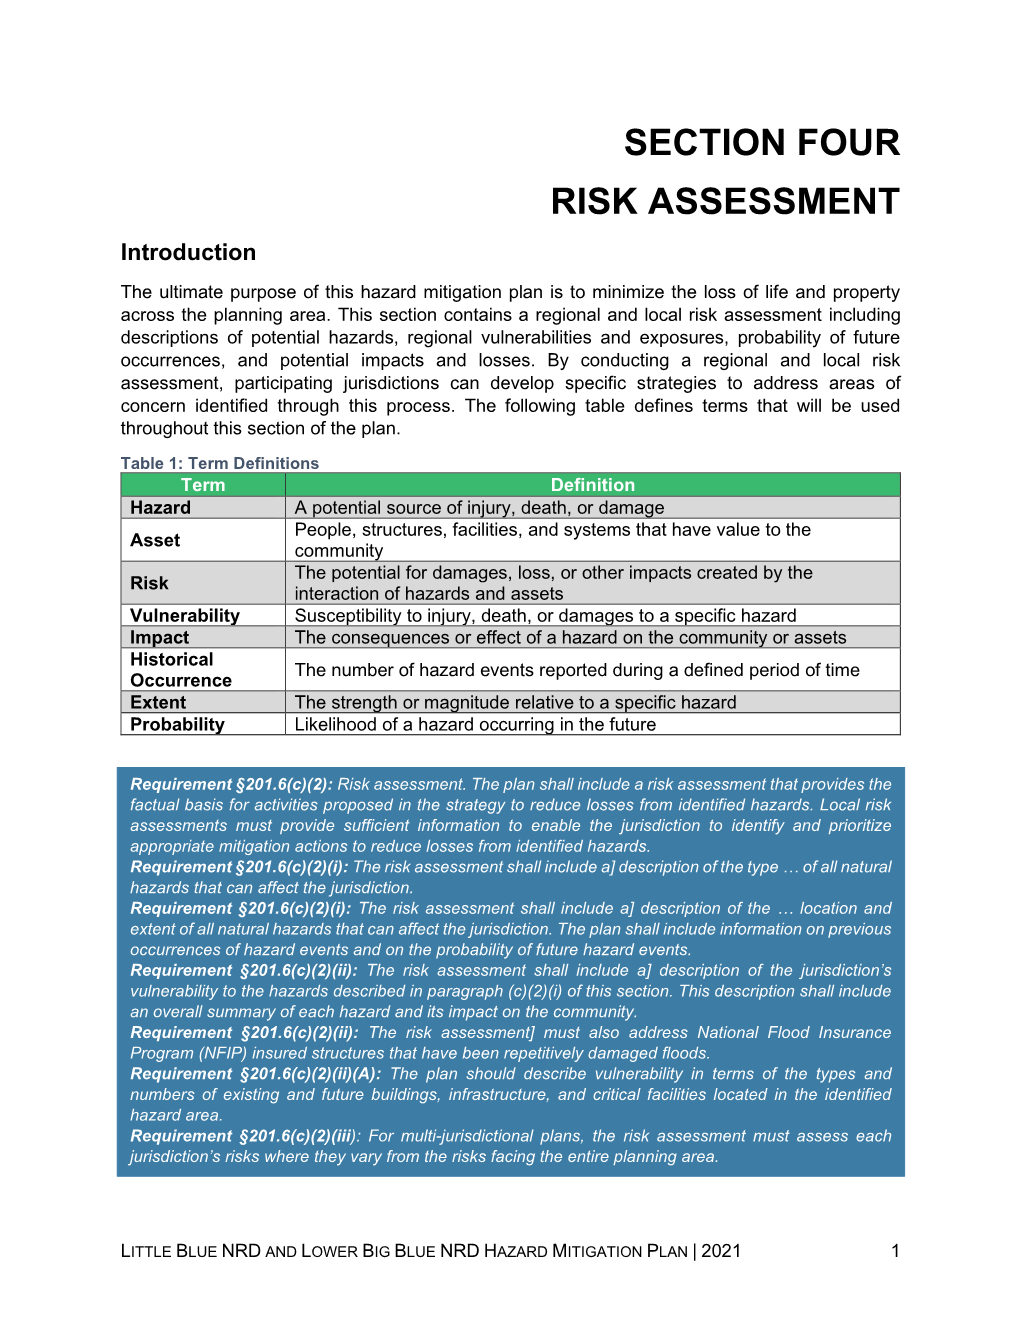 SECTION FOUR RISK ASSESSMENT Introduction